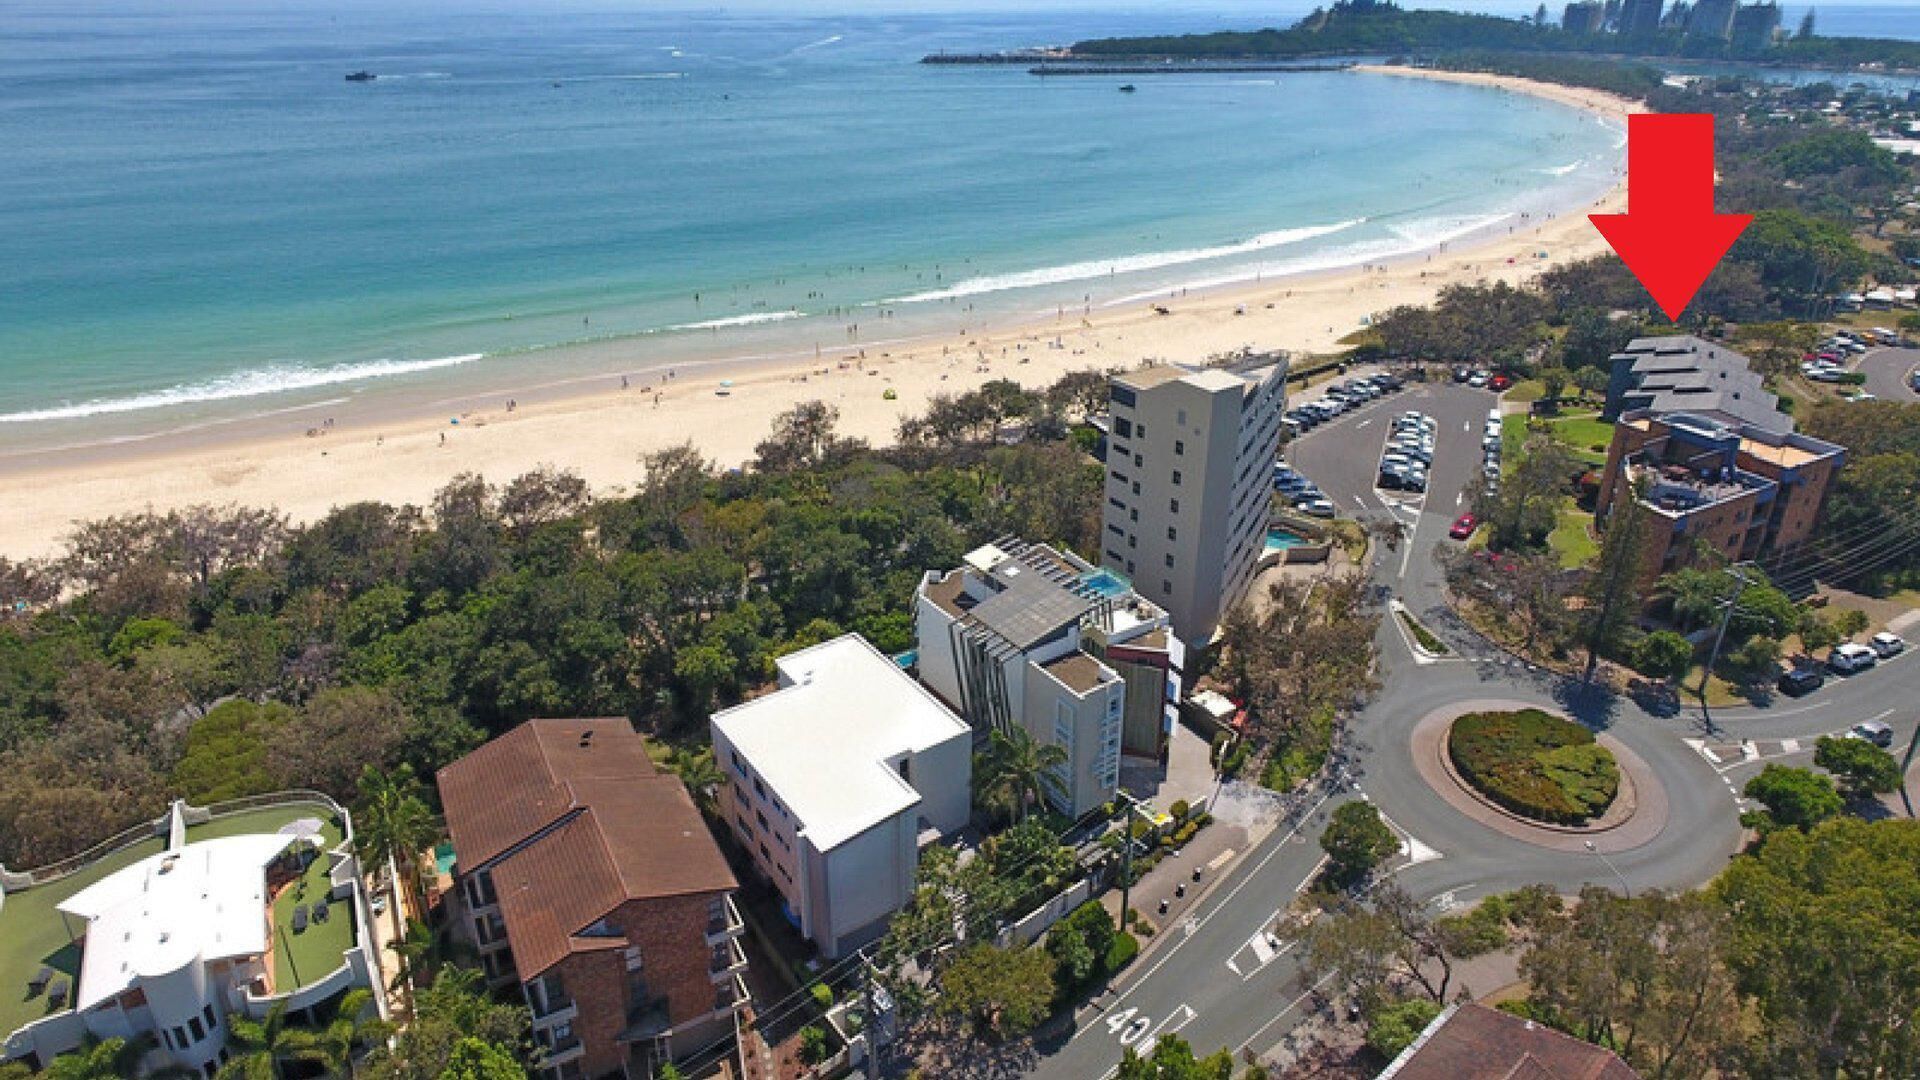 Illawong 4 - 2 Bedroom Unit just opposite the Beach